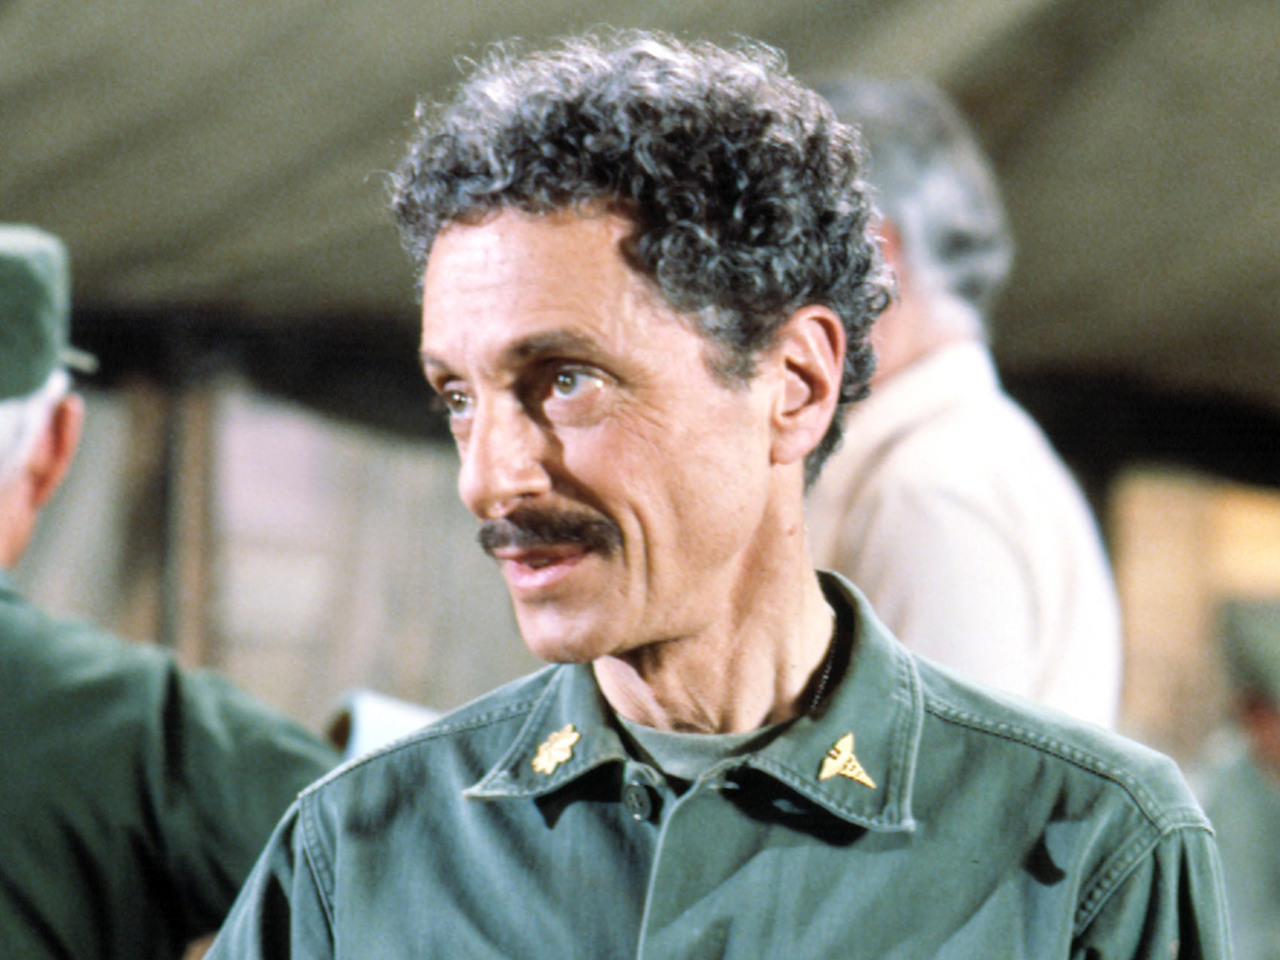 Allan Arbus, actor who starred on 'M*A*S*H,' dies at 95 - TODAY.com1280 x 960